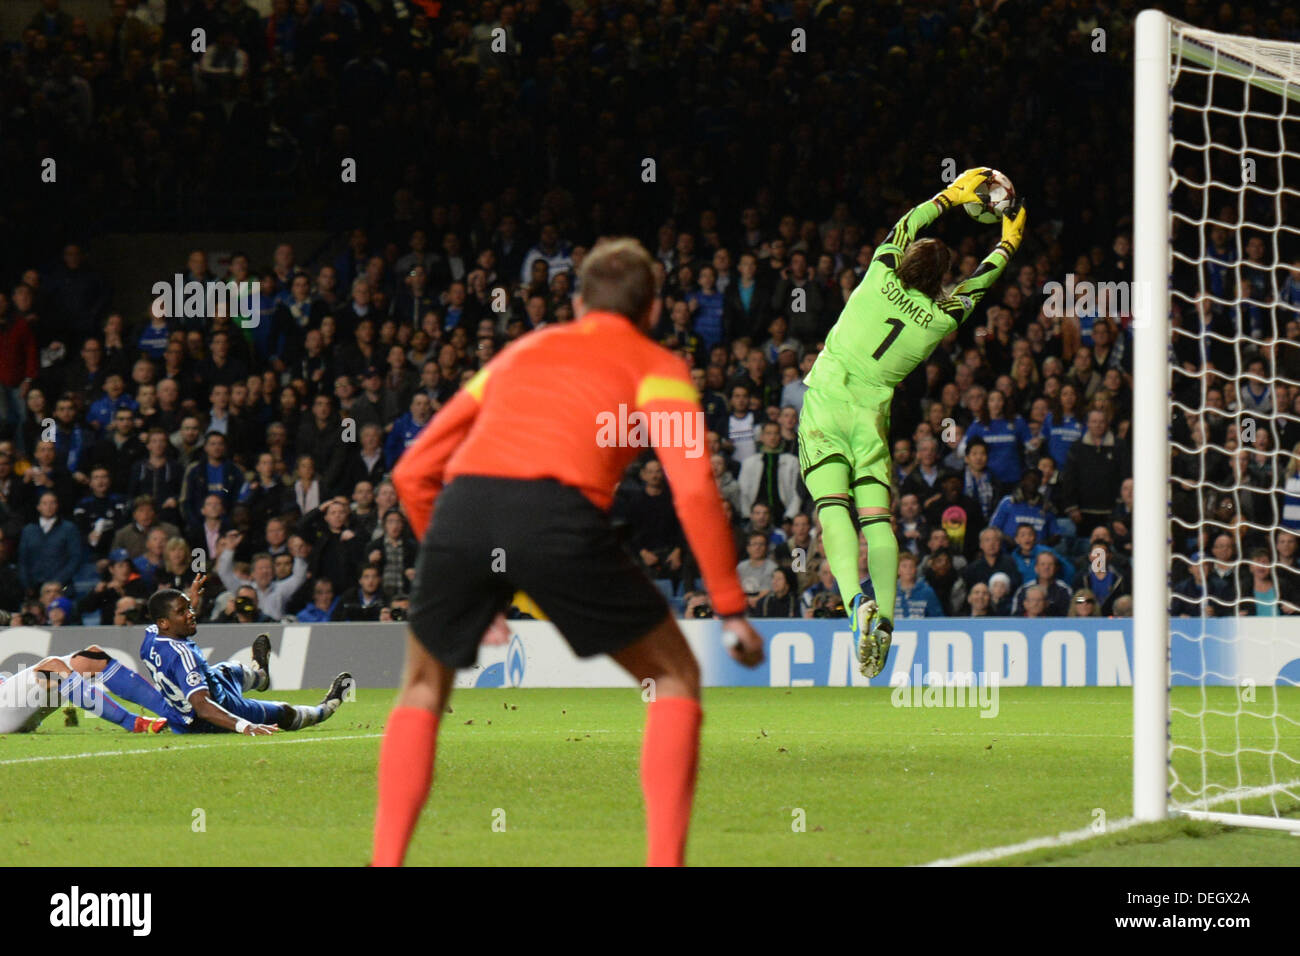 LONDON, ENGLAND - September 18: Basel's Yann Sommer makes a save during the UEFA Champions League Group E match between Chelsea from England and Basel from Switzerland played at Stamford Bridge, on September 18, 2013 in London, England. (Photo by Mitchell Gunn/ESPA) Credit:  European Sports Photographic Agency/Alamy Live News Stock Photo